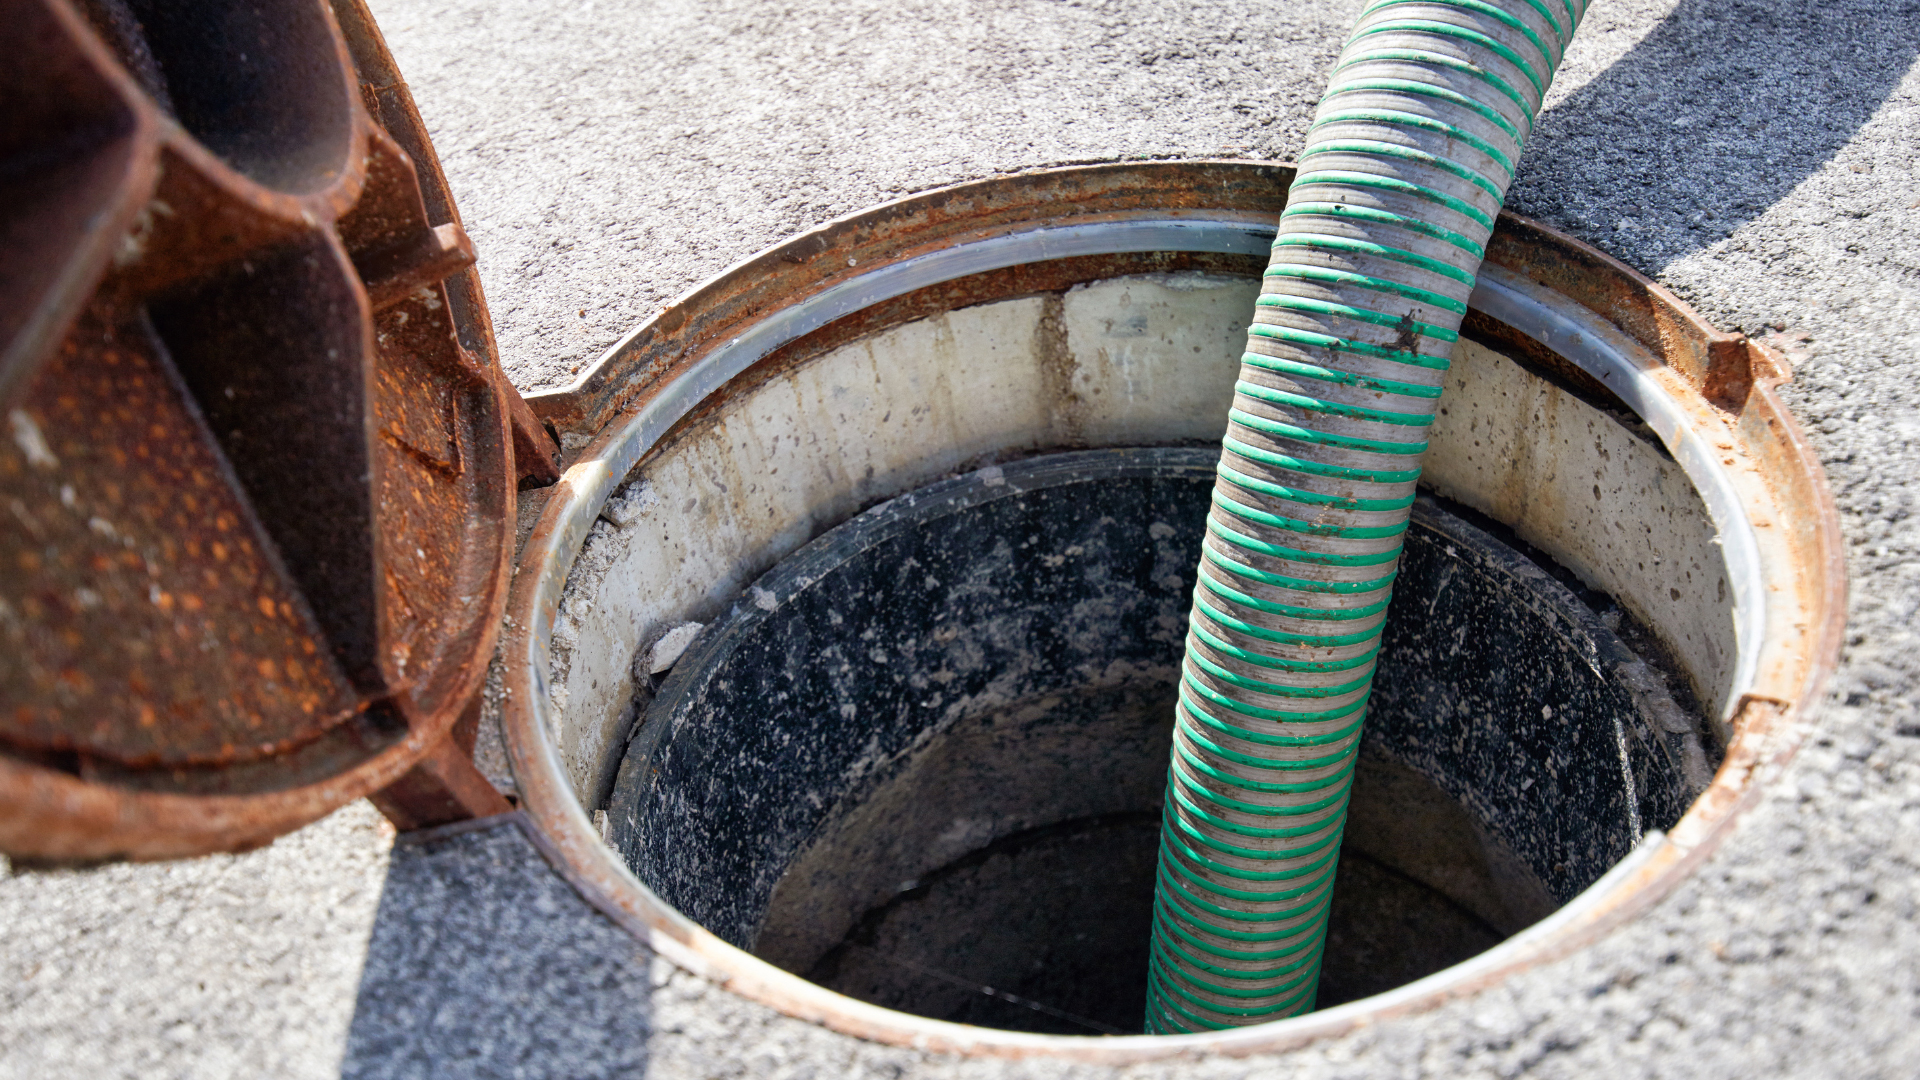 Sewer & Drain Cleaning in Charleston, SC from Fix-it 24/7 Air Conditioning, Plumbing & Heating